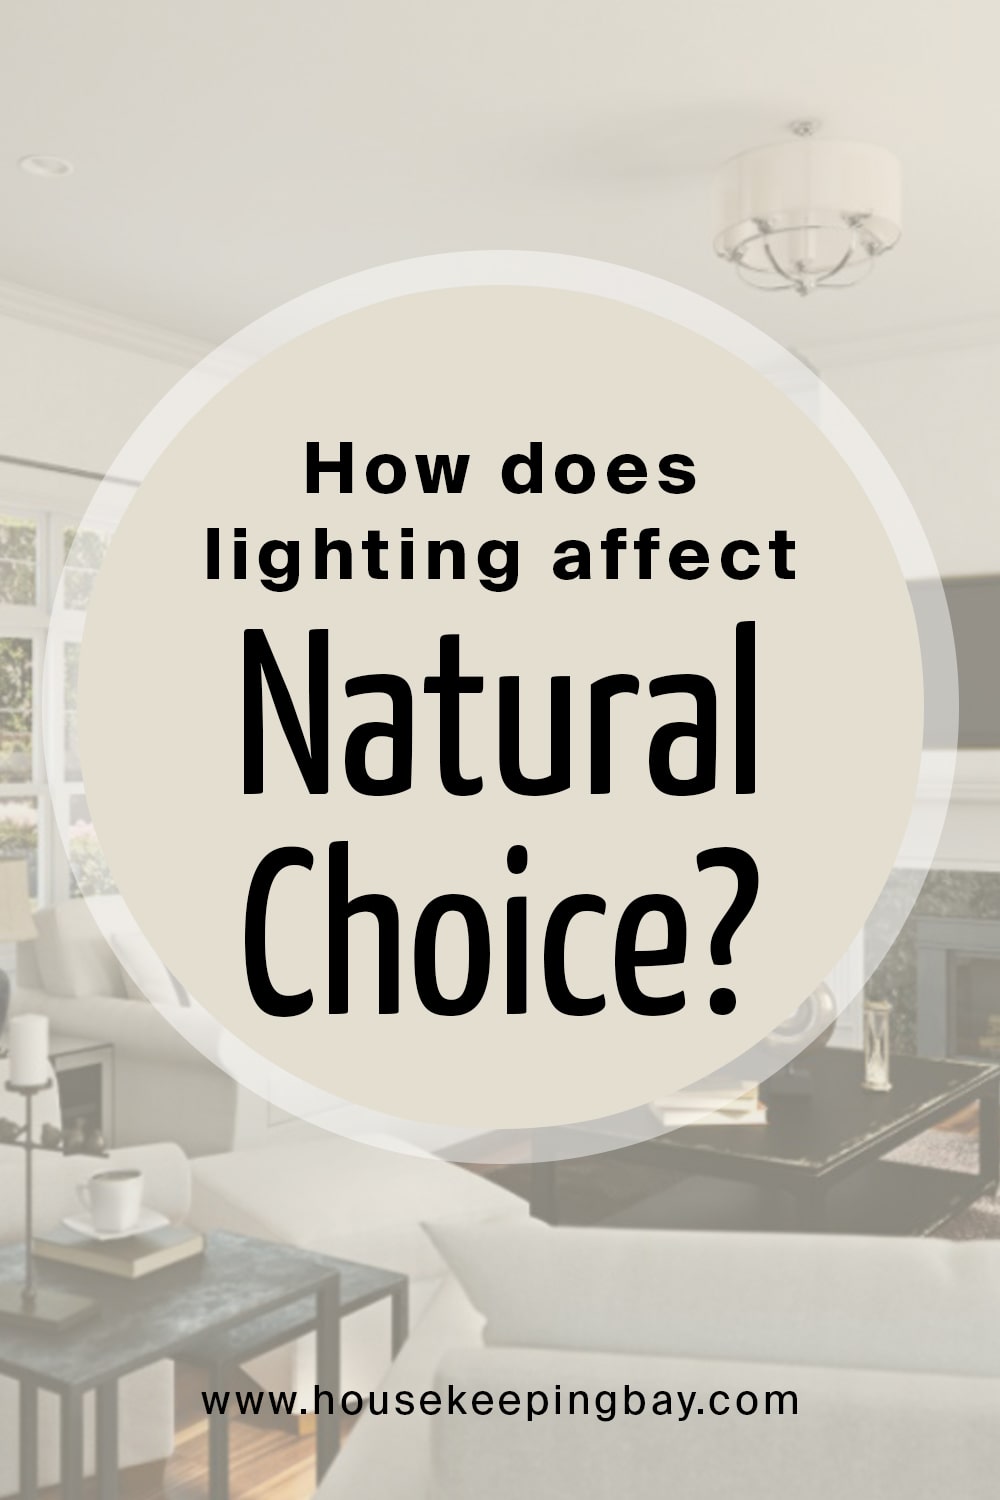 How does lighting affect Natural Choice